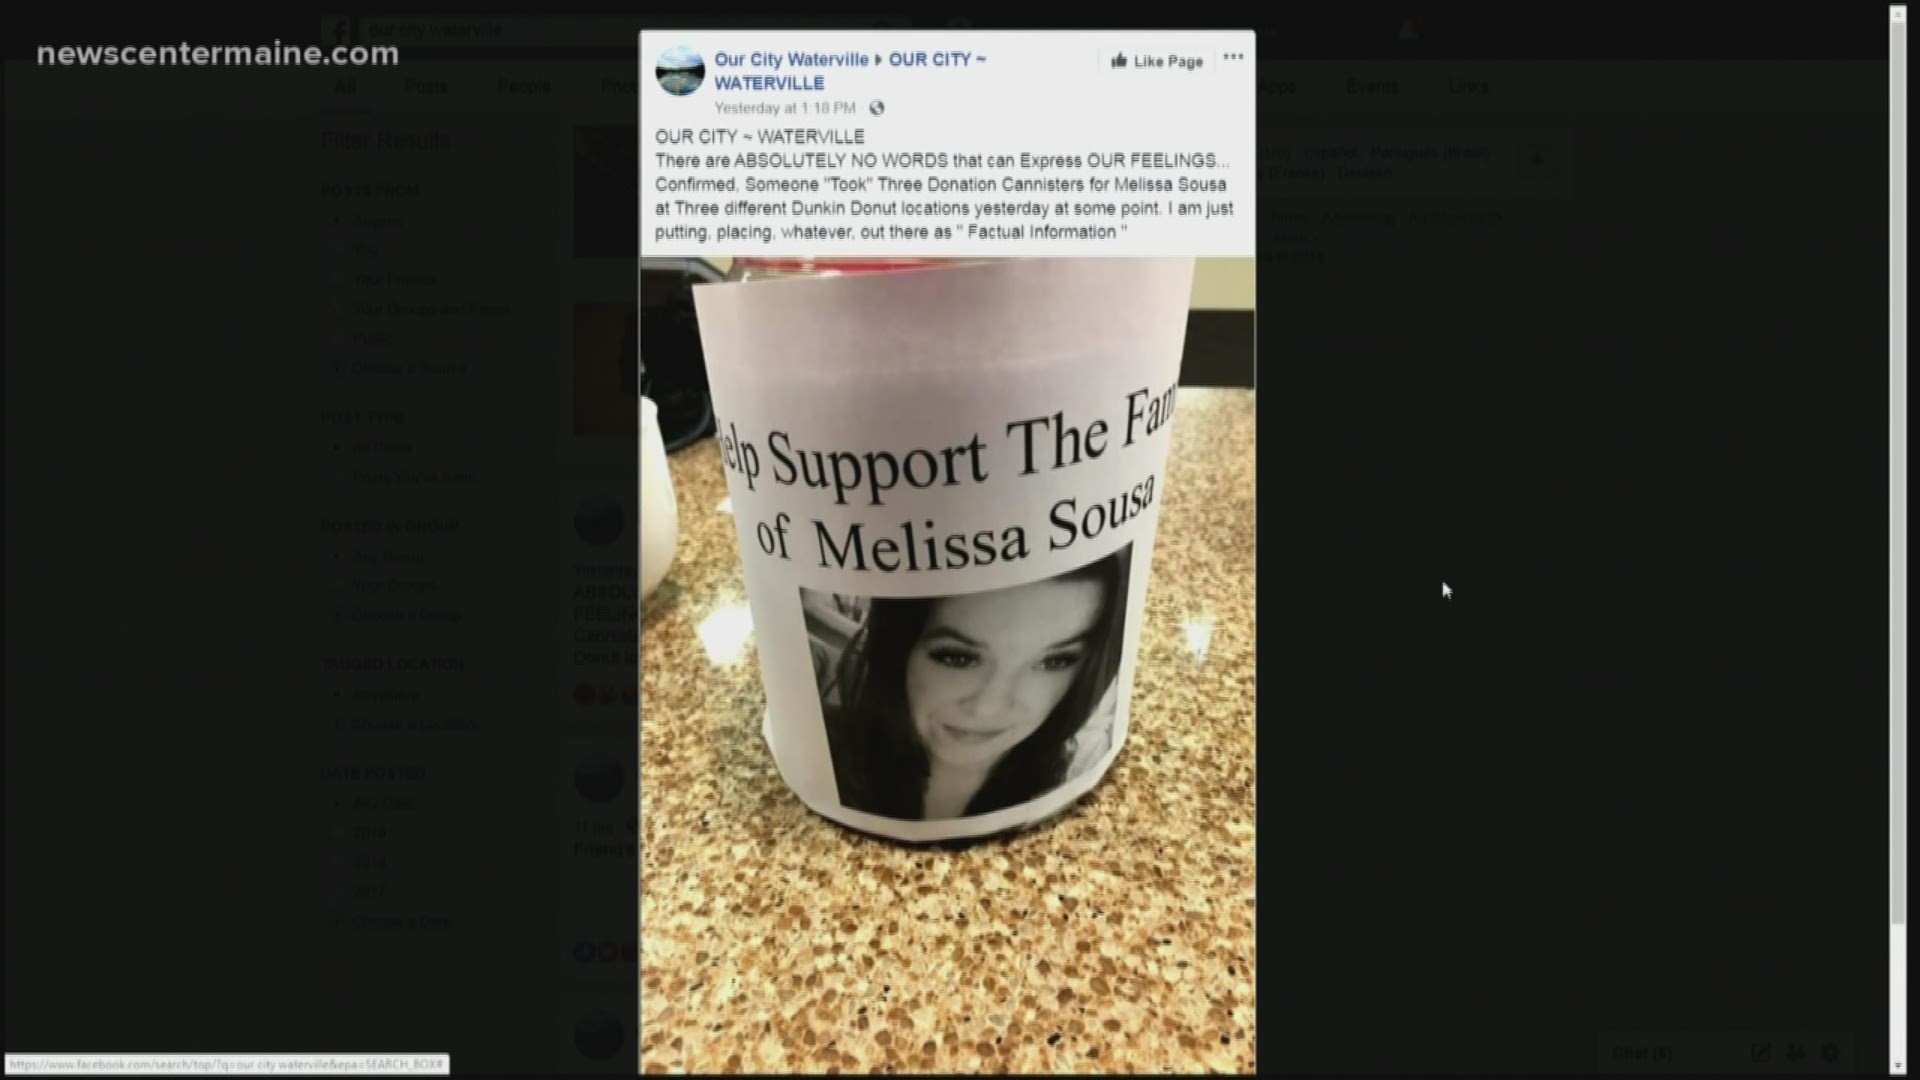 According to the Facebook page Our City Waterville, 3 donation canisters were stolen Sunday night while a vigil was being held for murdered mom Melissa Sousa.